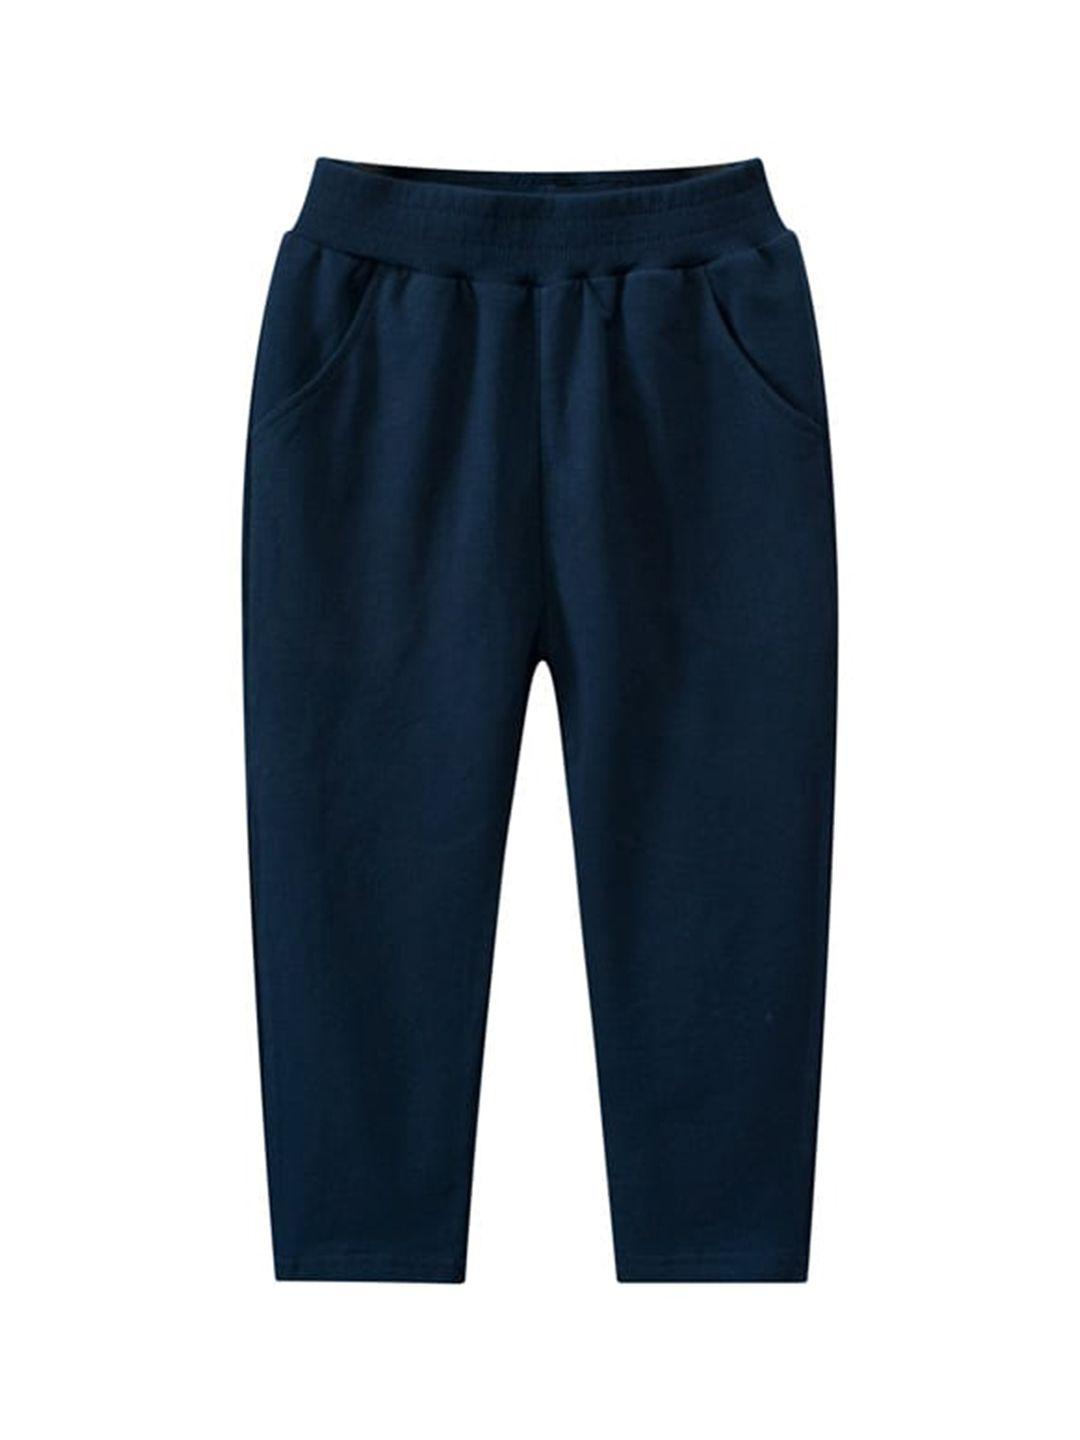 stylecast boys navy blue slim fit easy wash cotton trousers